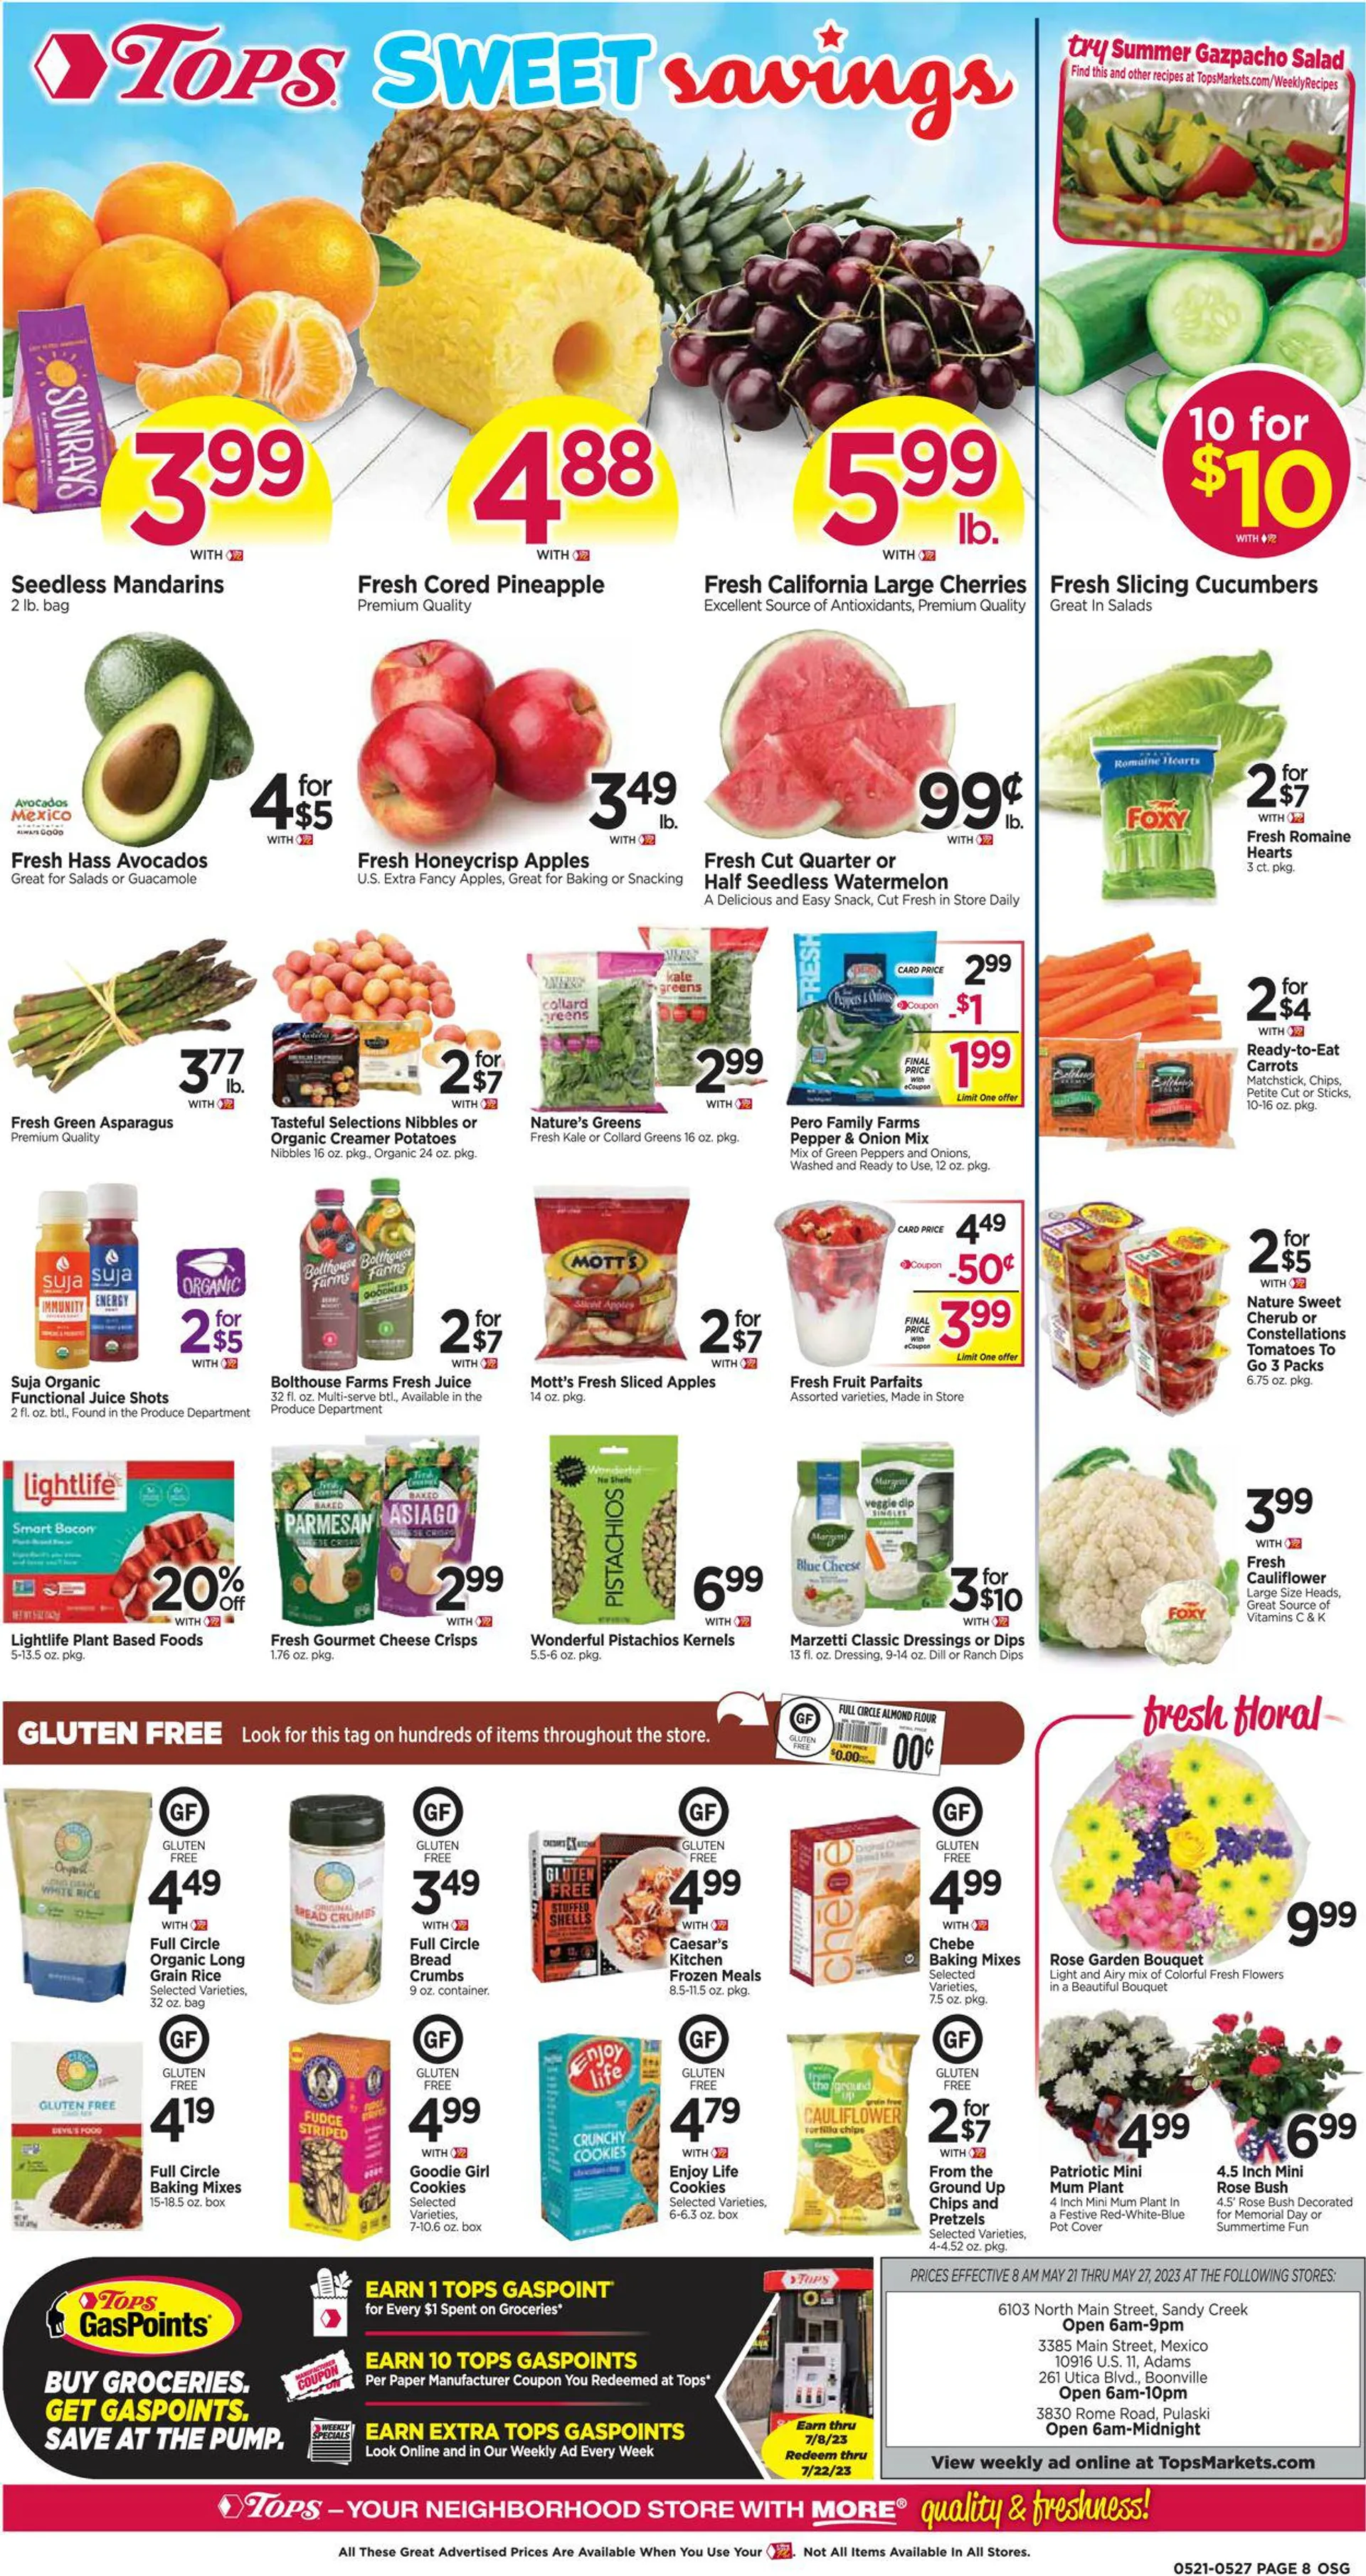 Tops Friendly Markets Current weekly ad - 10